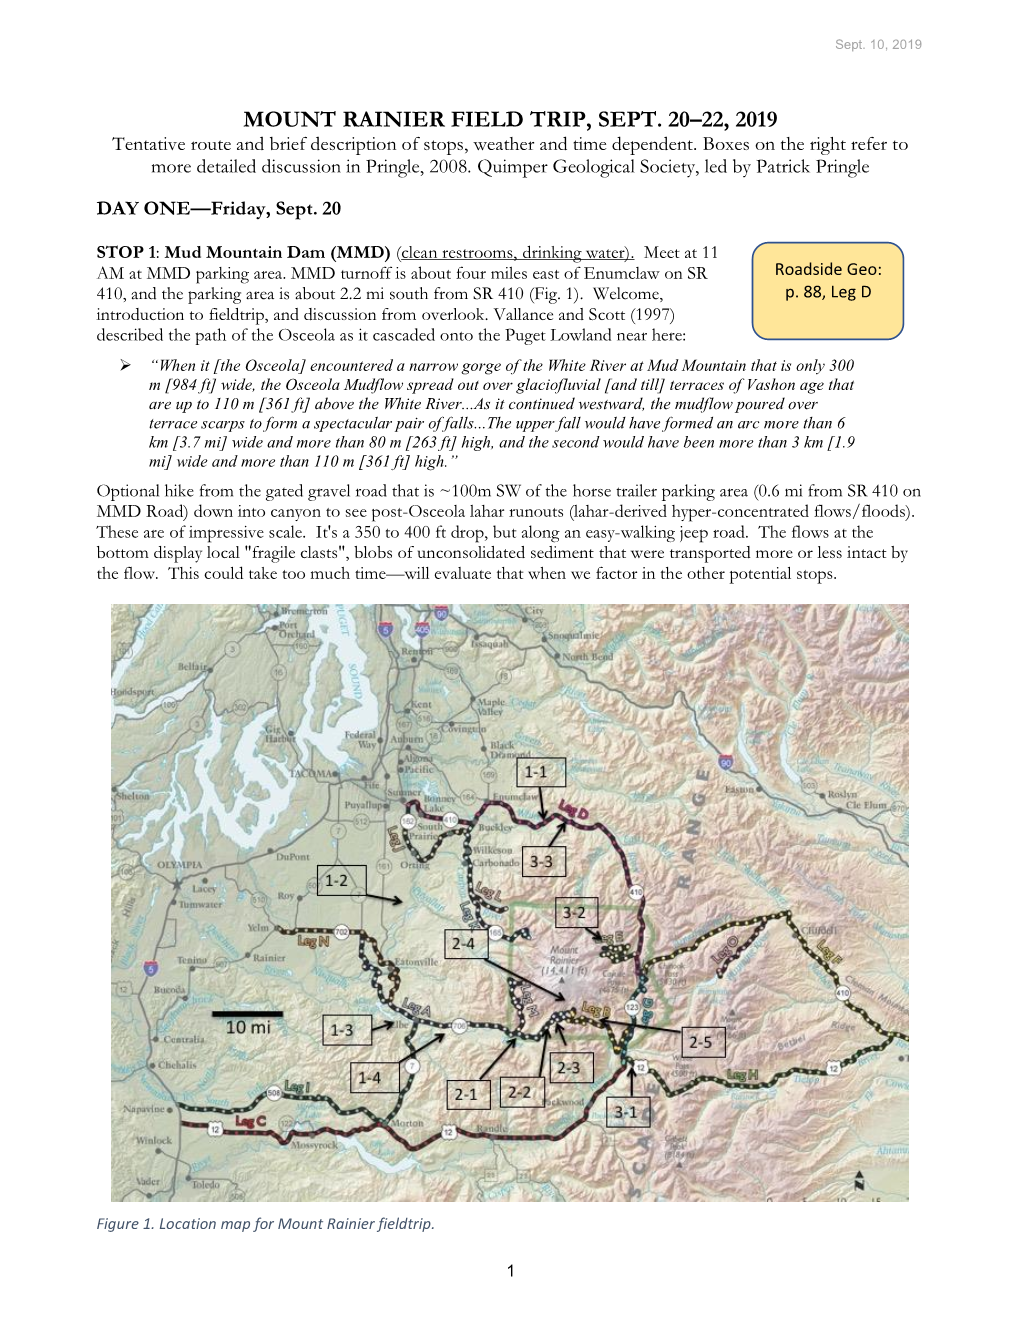 MOUNT RAINIER FIELD TRIP, SEPT. 20–22, 2019 Tentative Route and Brief Description of Stops, Weather and Time Dependent